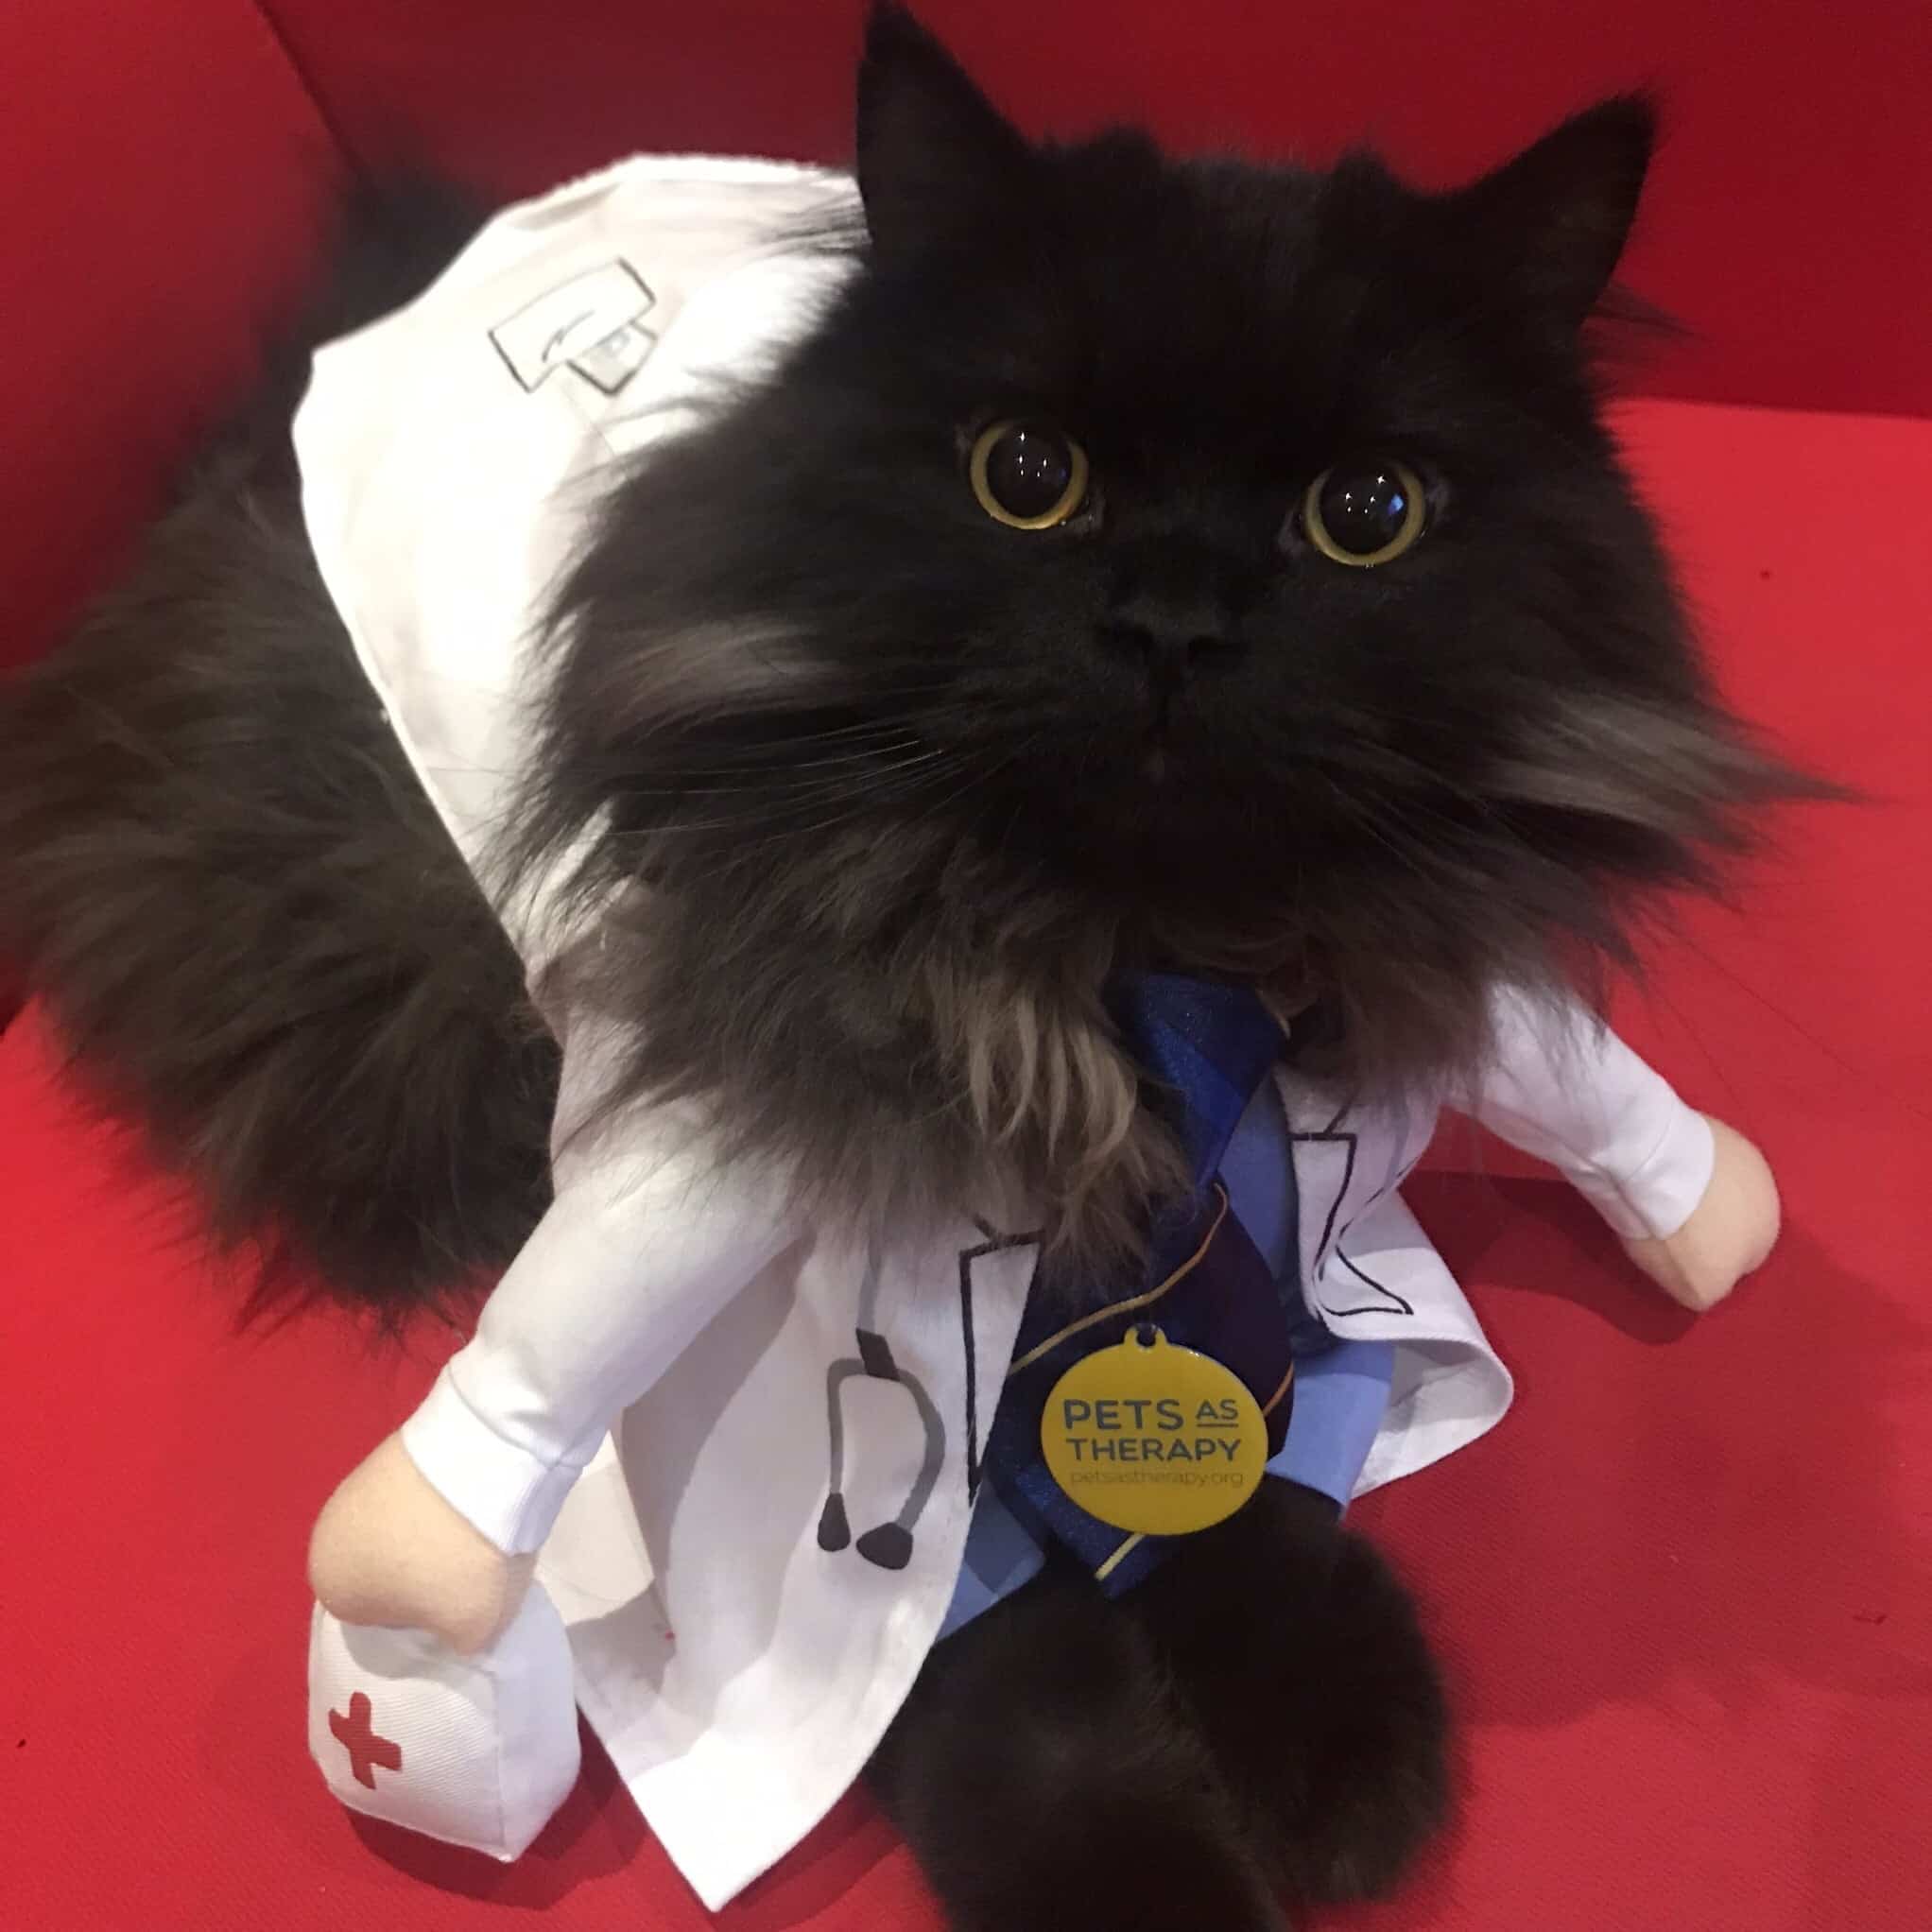 Meet London the Pets as Therapy Cat